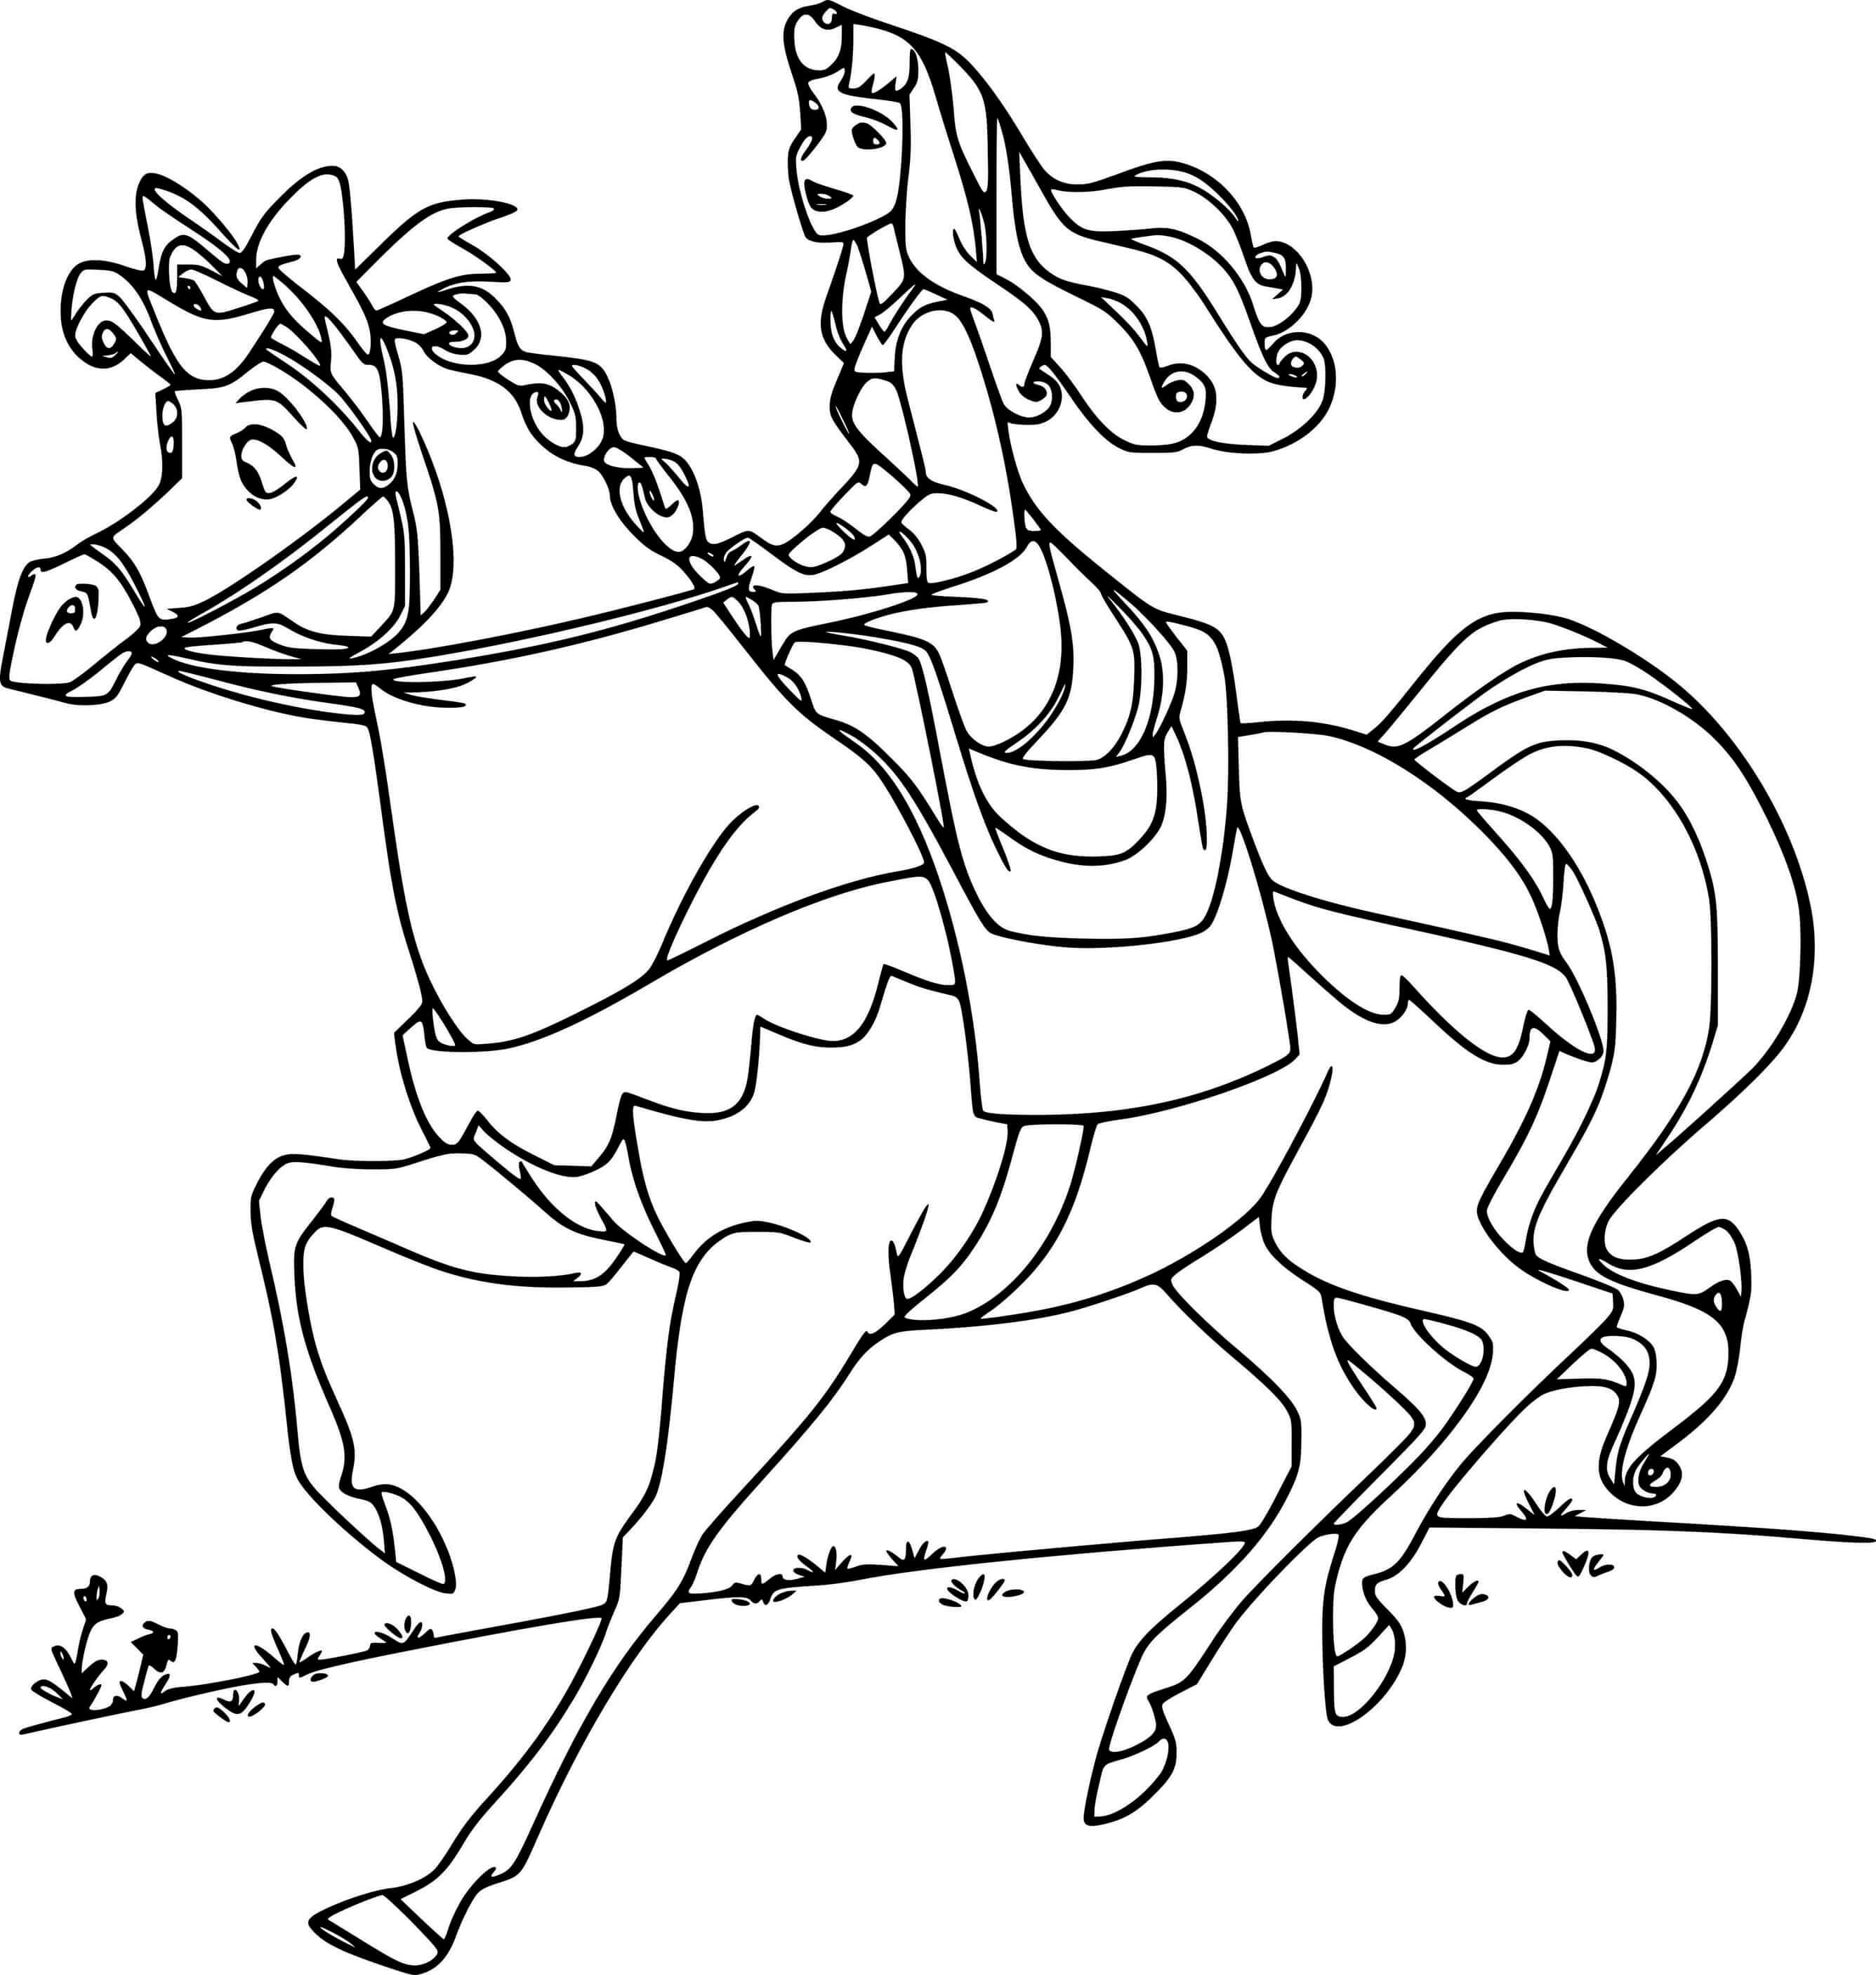 Aurora Riding A Horse Disney Princess Coloring Pages   Coloring Cool